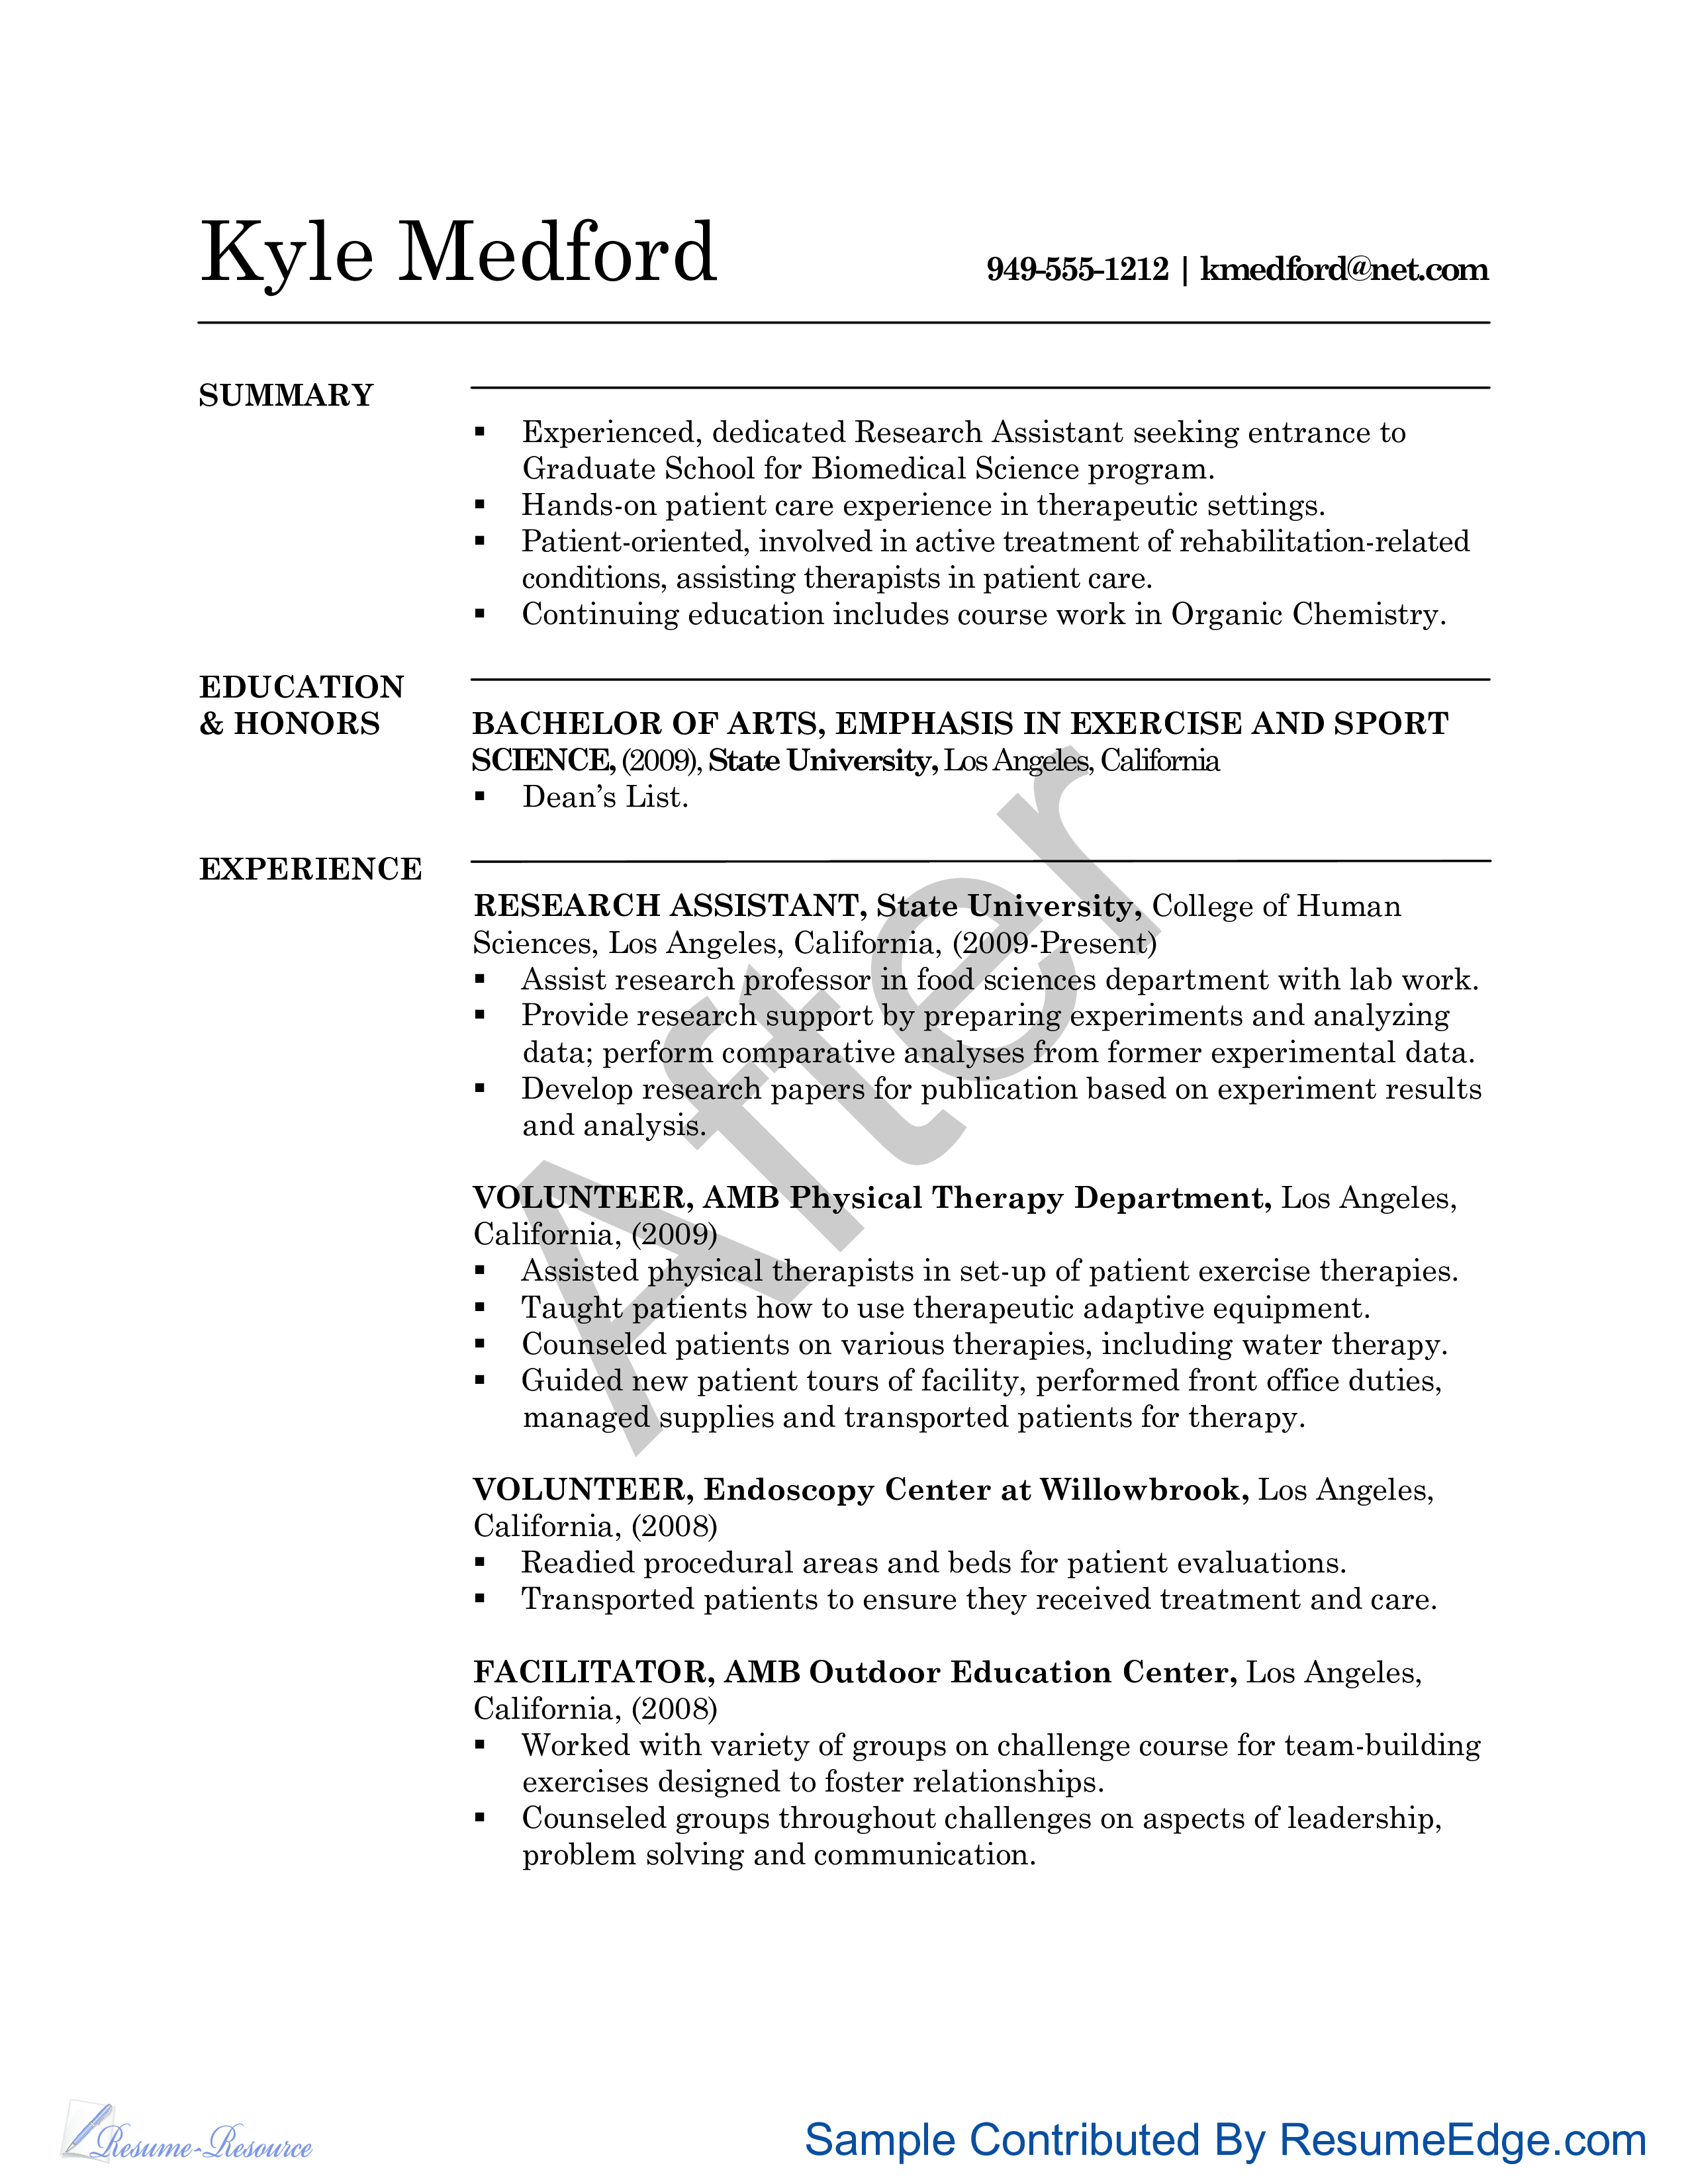 Research Assistant CV Sample main image